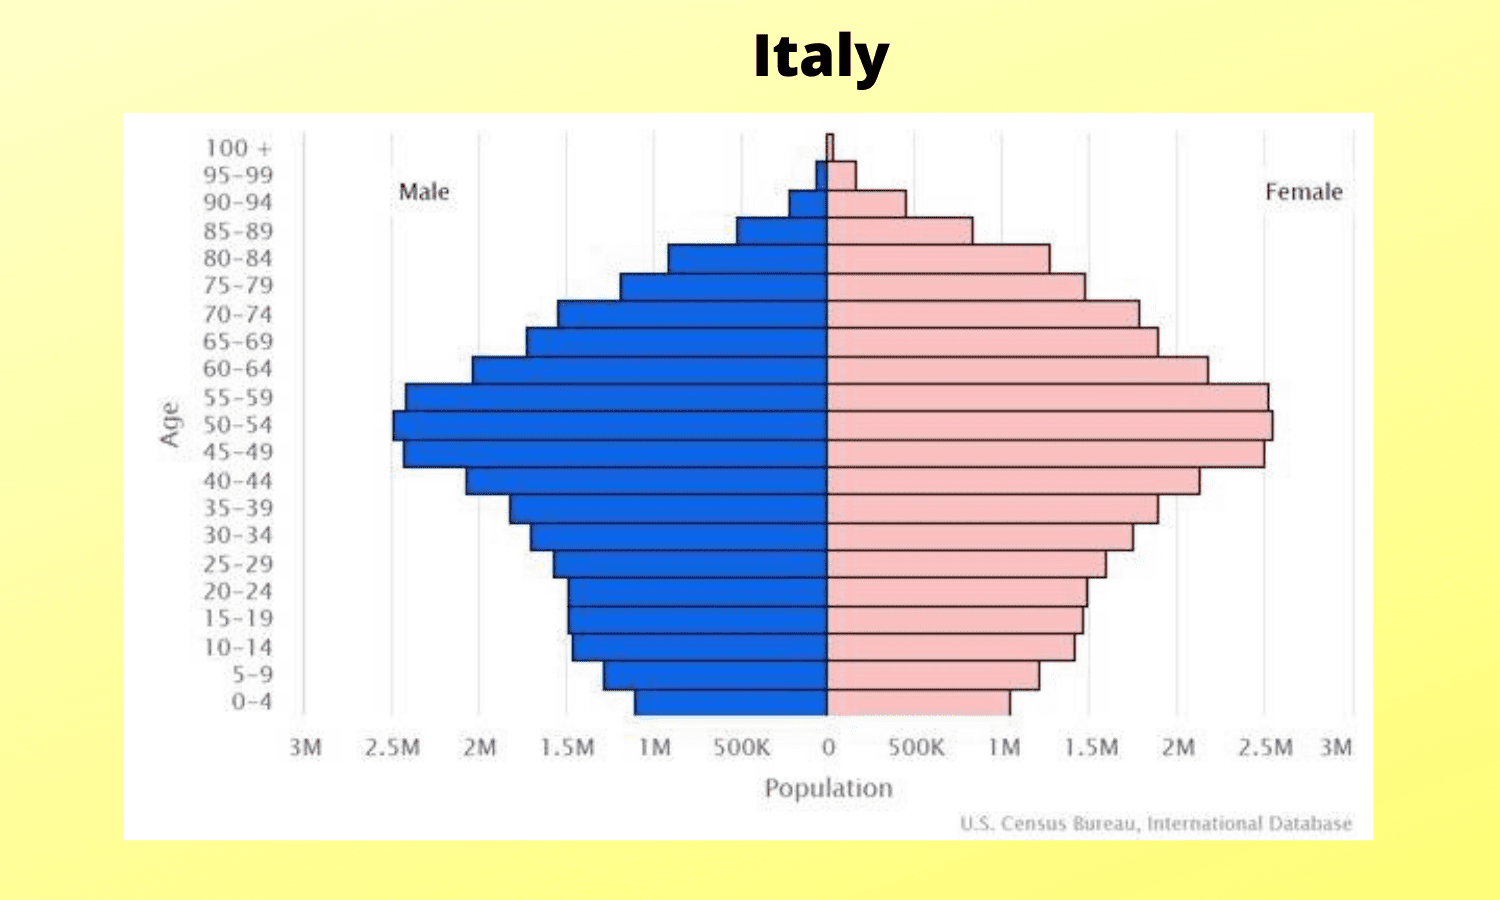 A population pyramid for Italy shows population by age cohort and gender